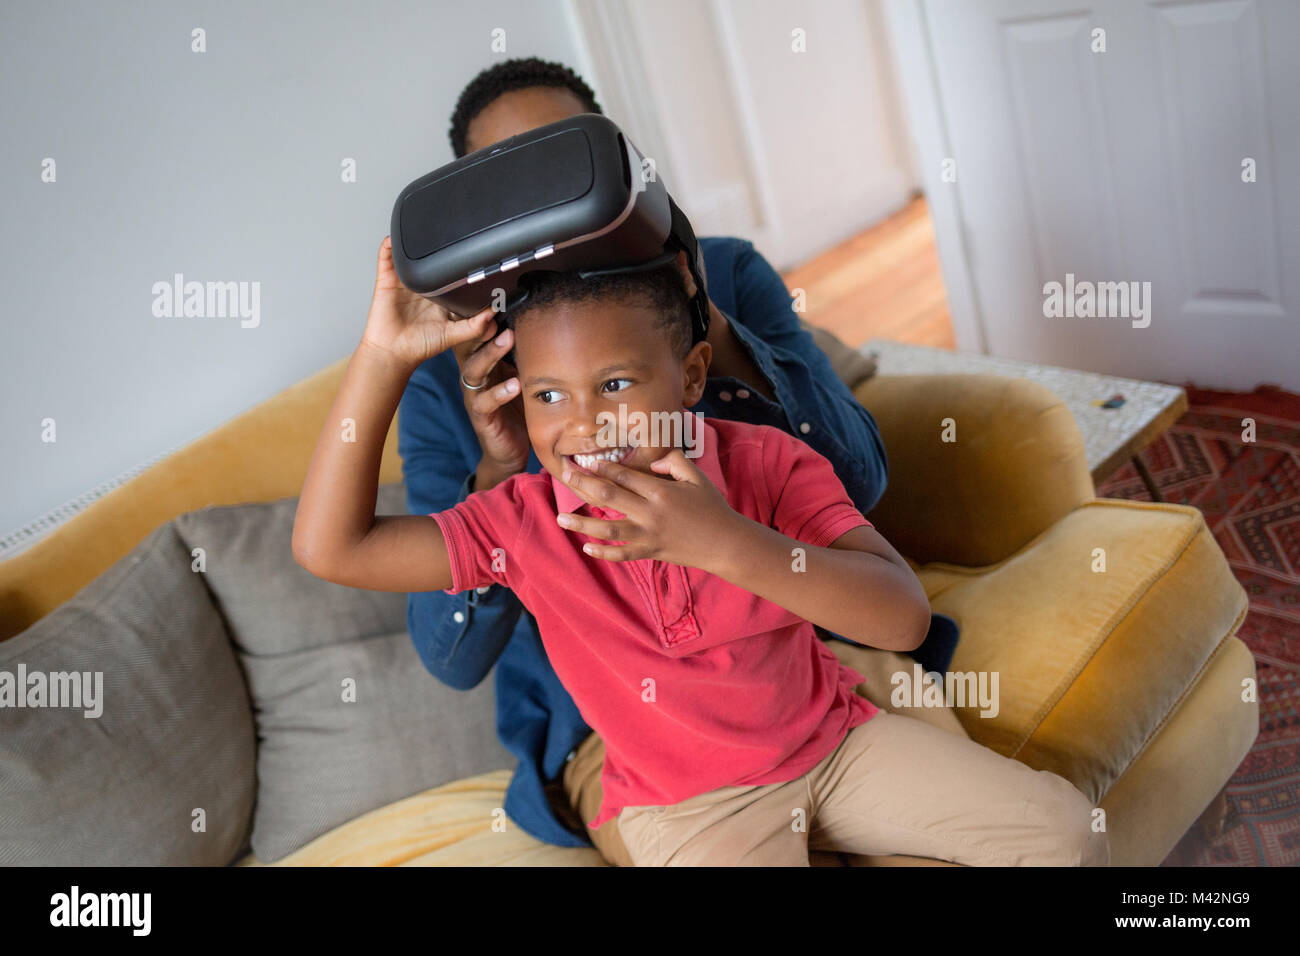 Boy with VR headset Stock Photo